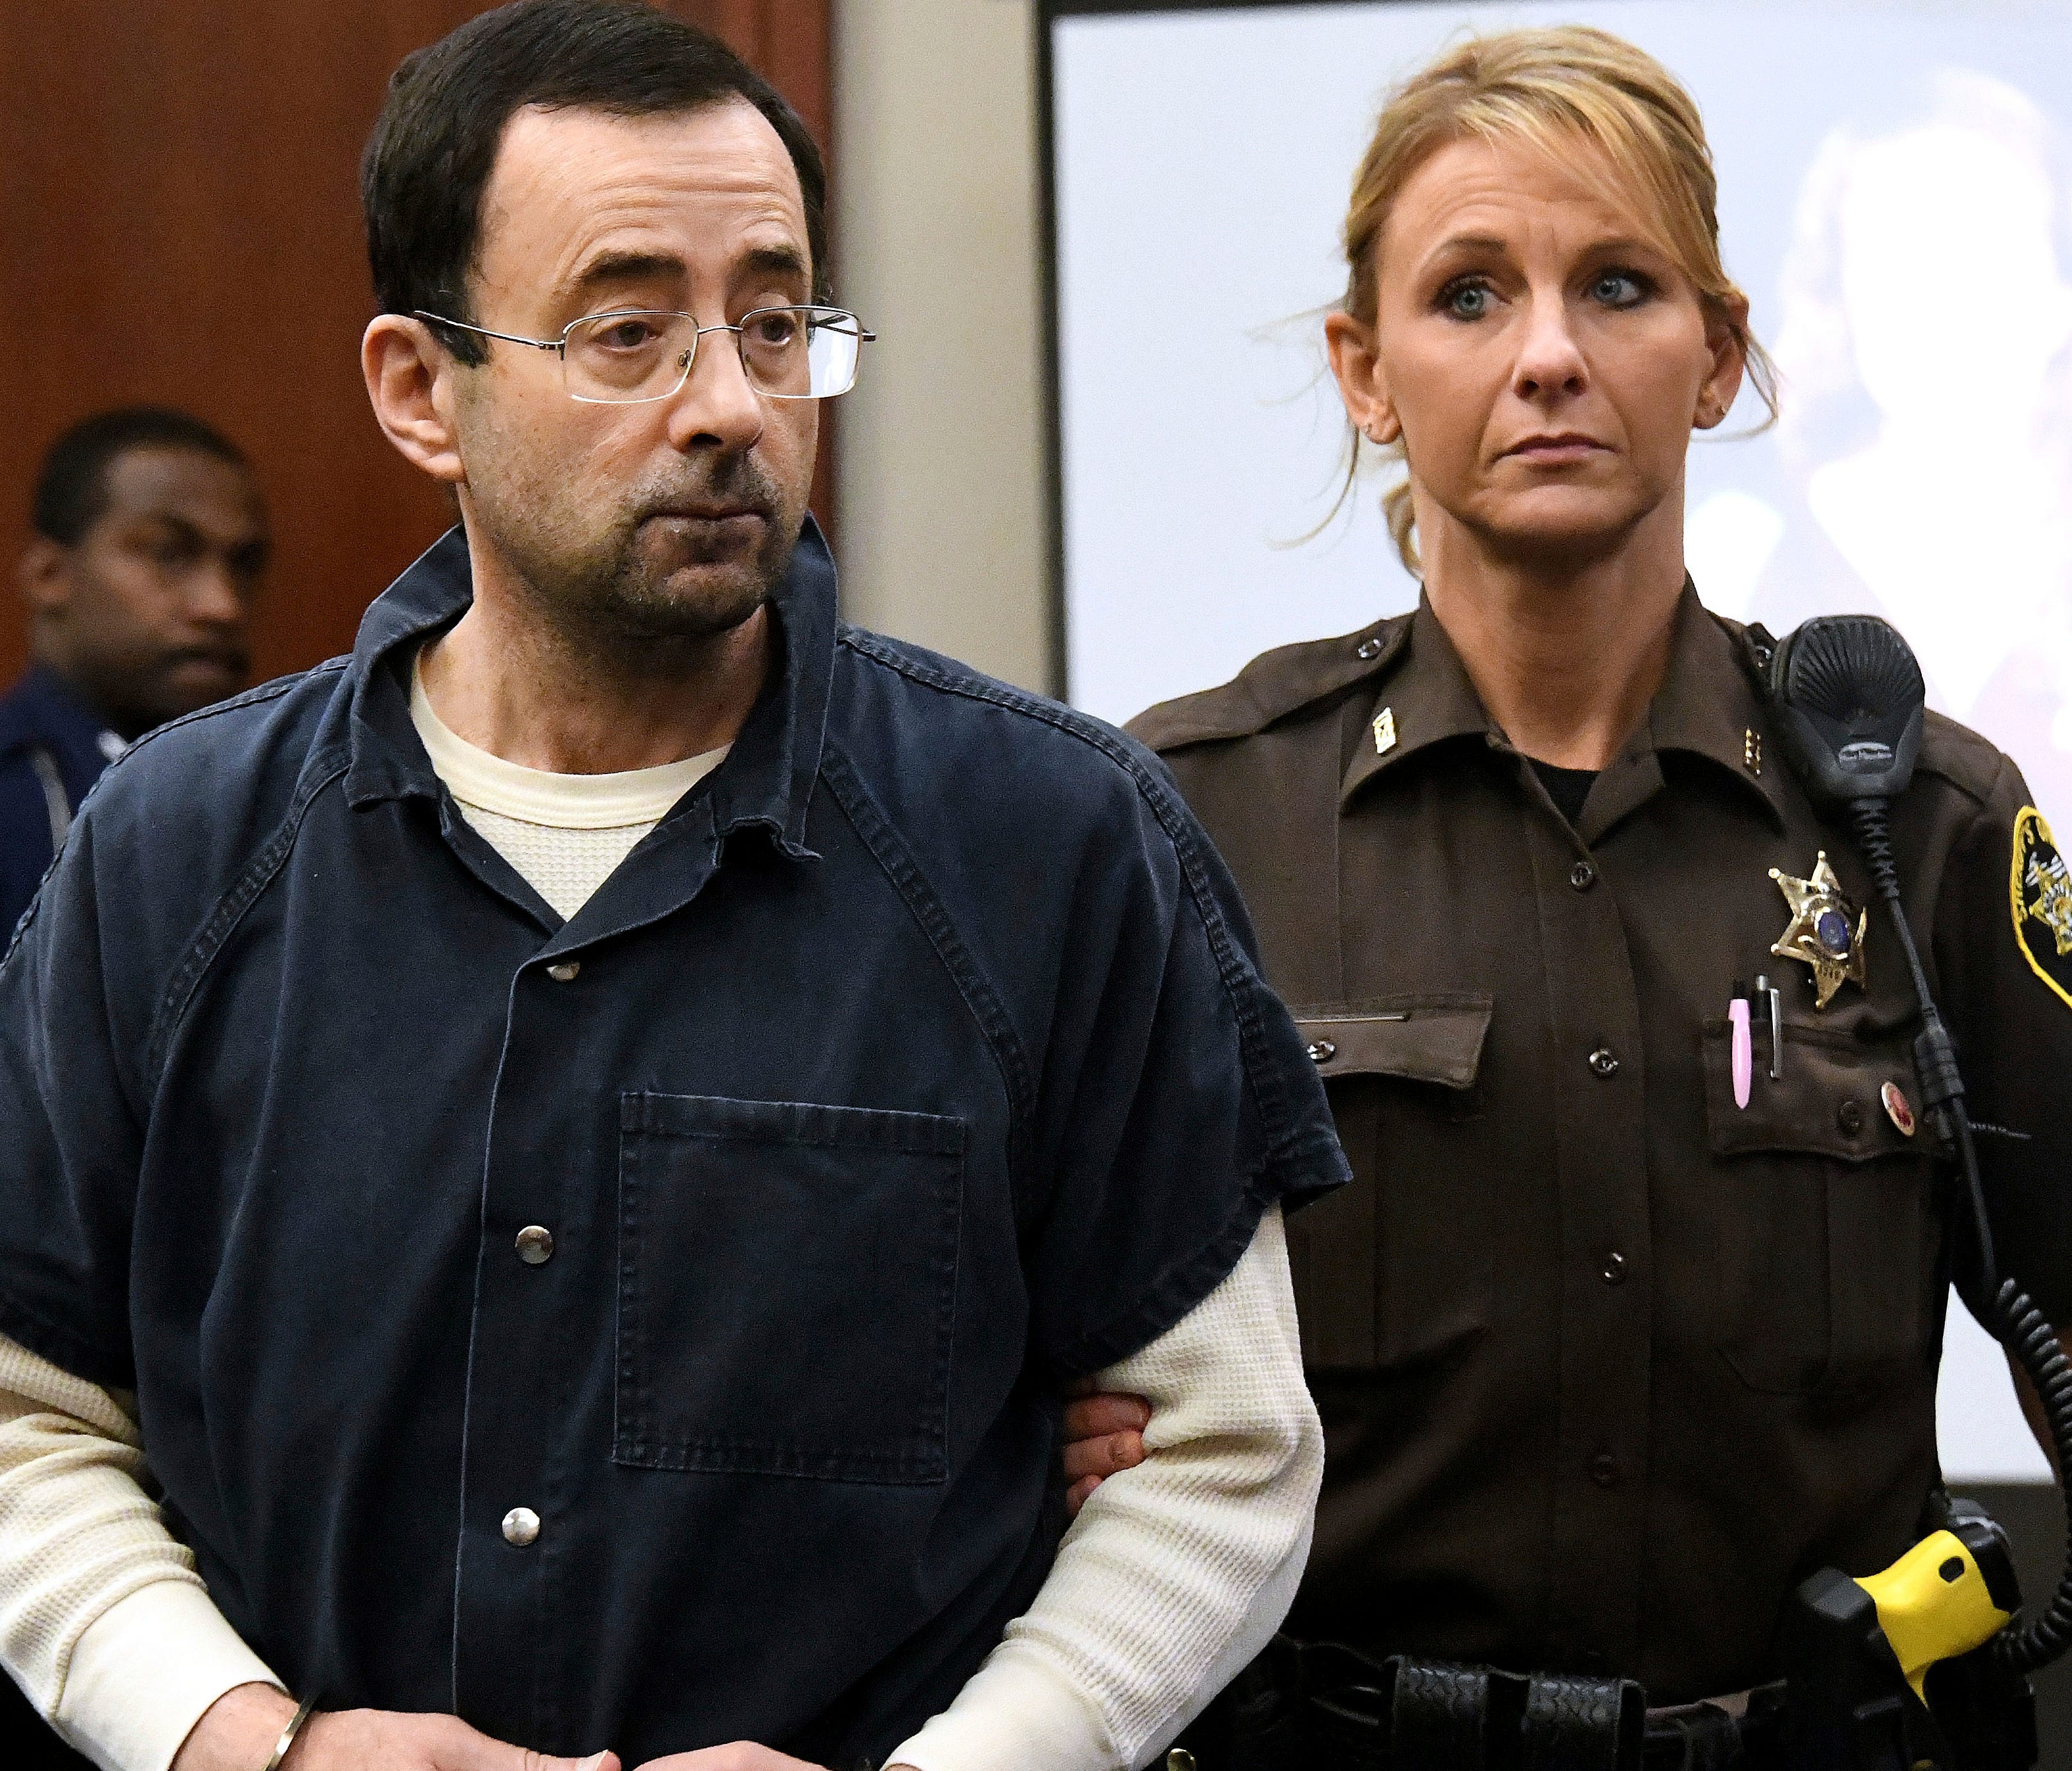 Larry Nassar is pictured being escorted into the courtroom in Lansing, Mich.